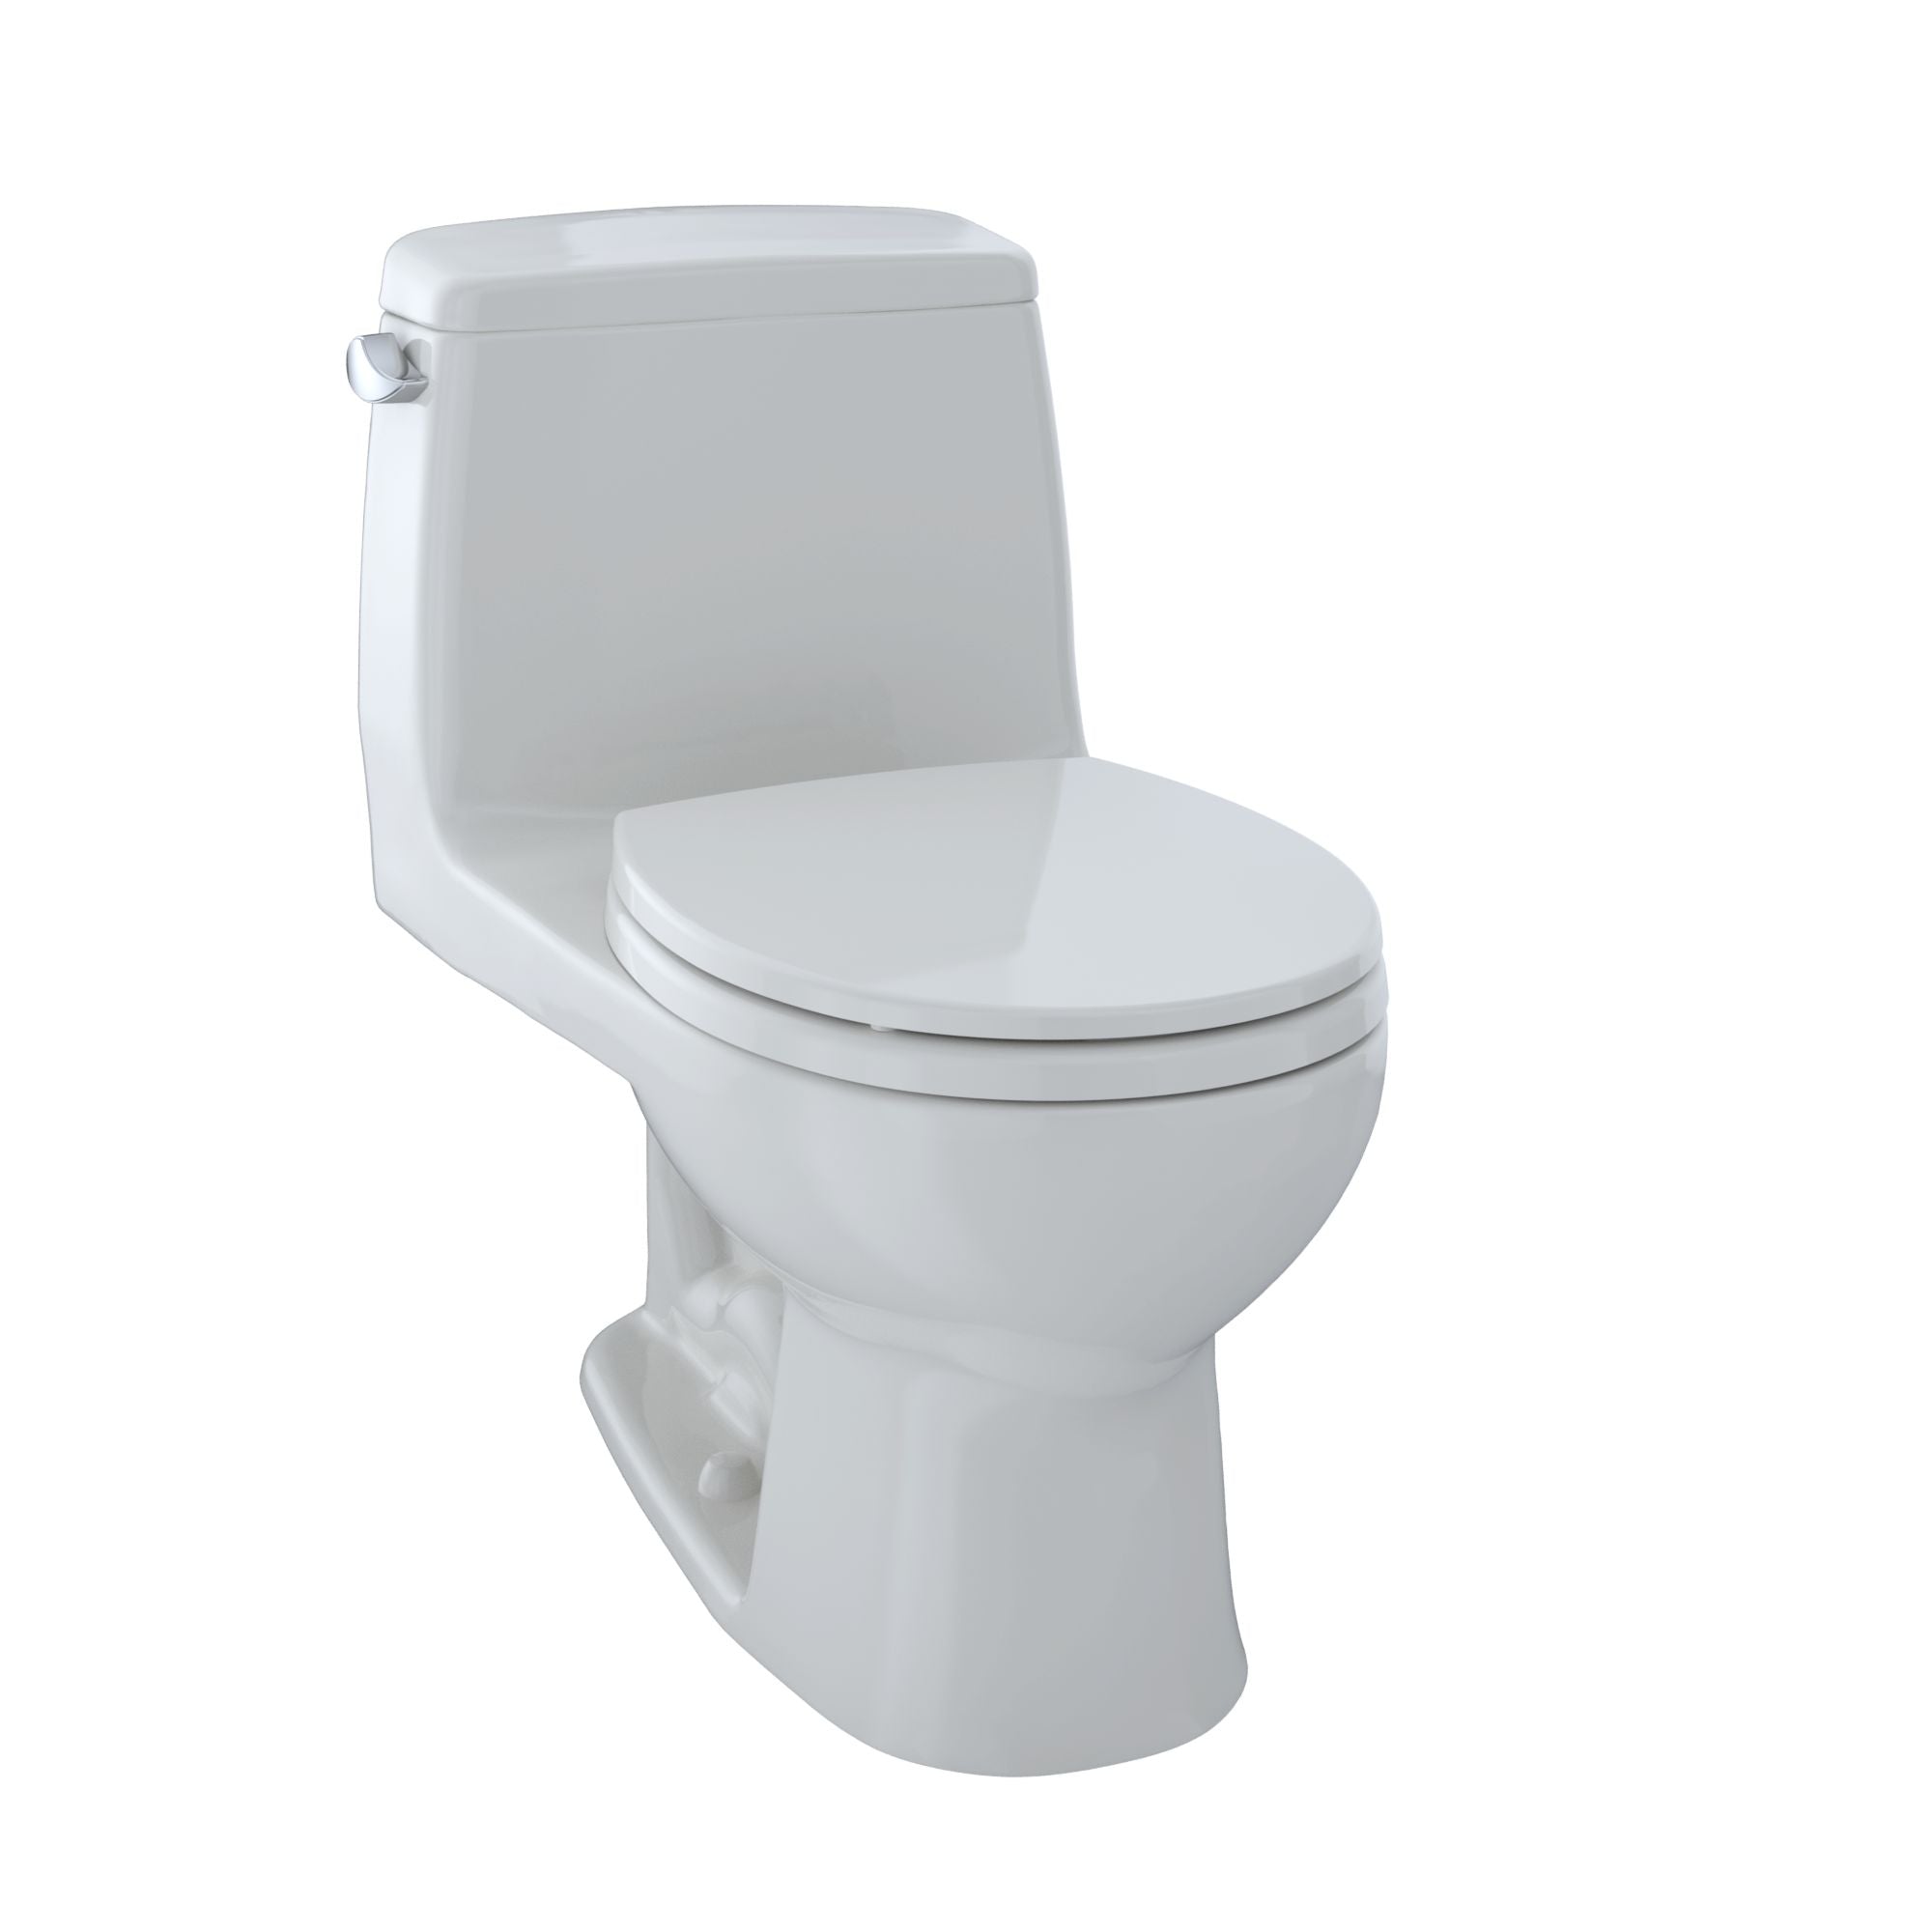 Toto Ultramax One-piece Toilet 1.6 GPF Round Bowl